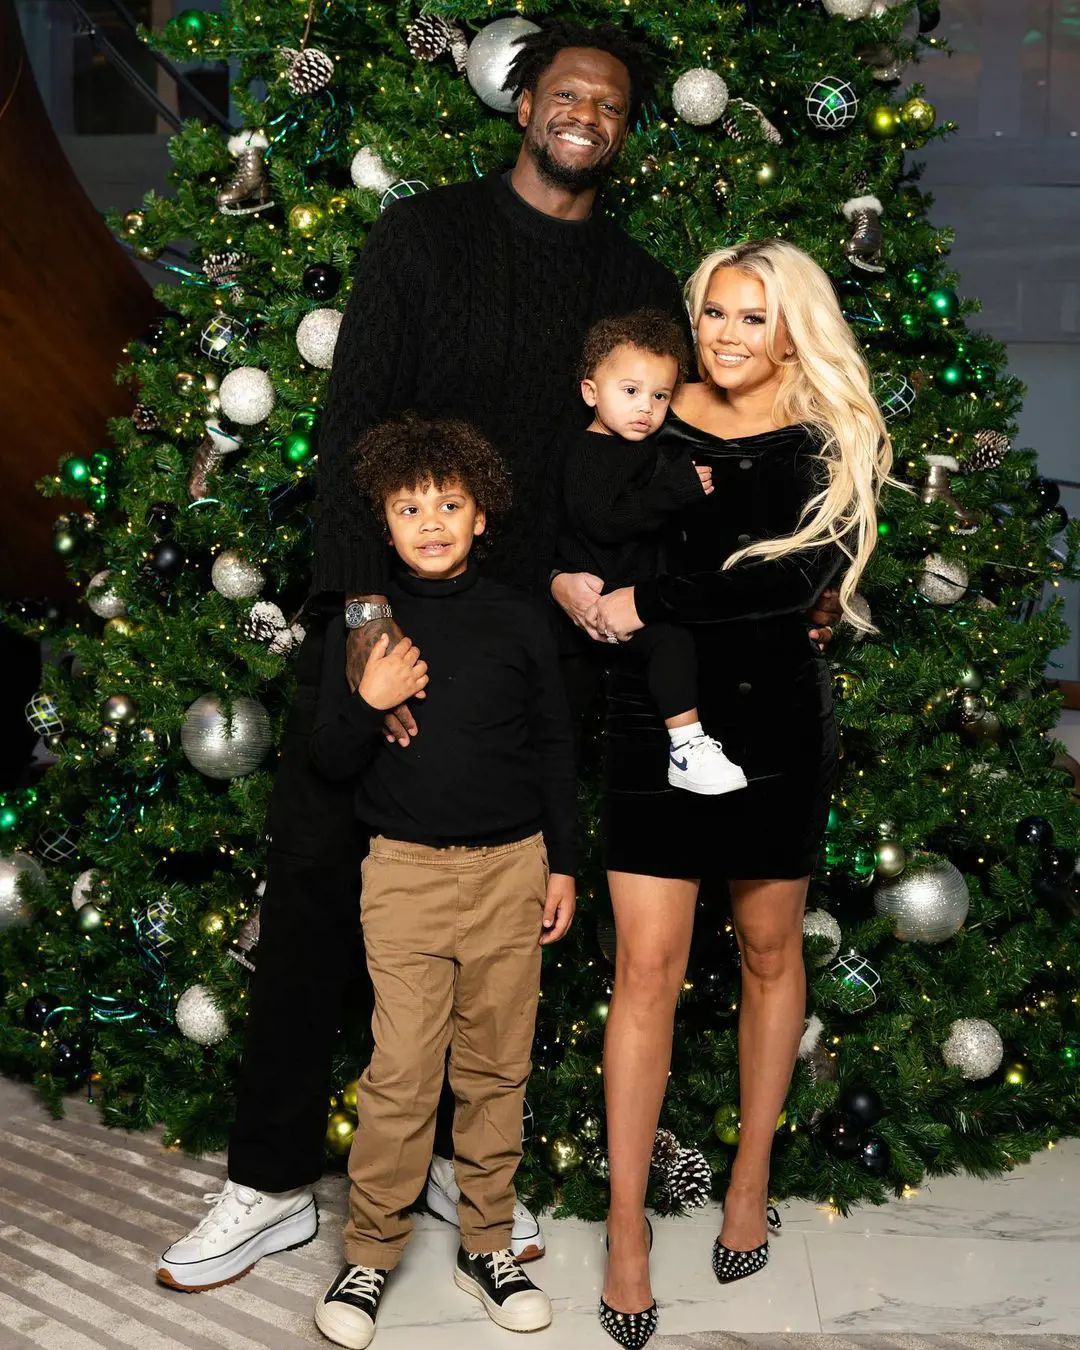 Julius and his wife Kendra celebrates Christmas with their two sons Kyden and Jayce in December 2022 in New York